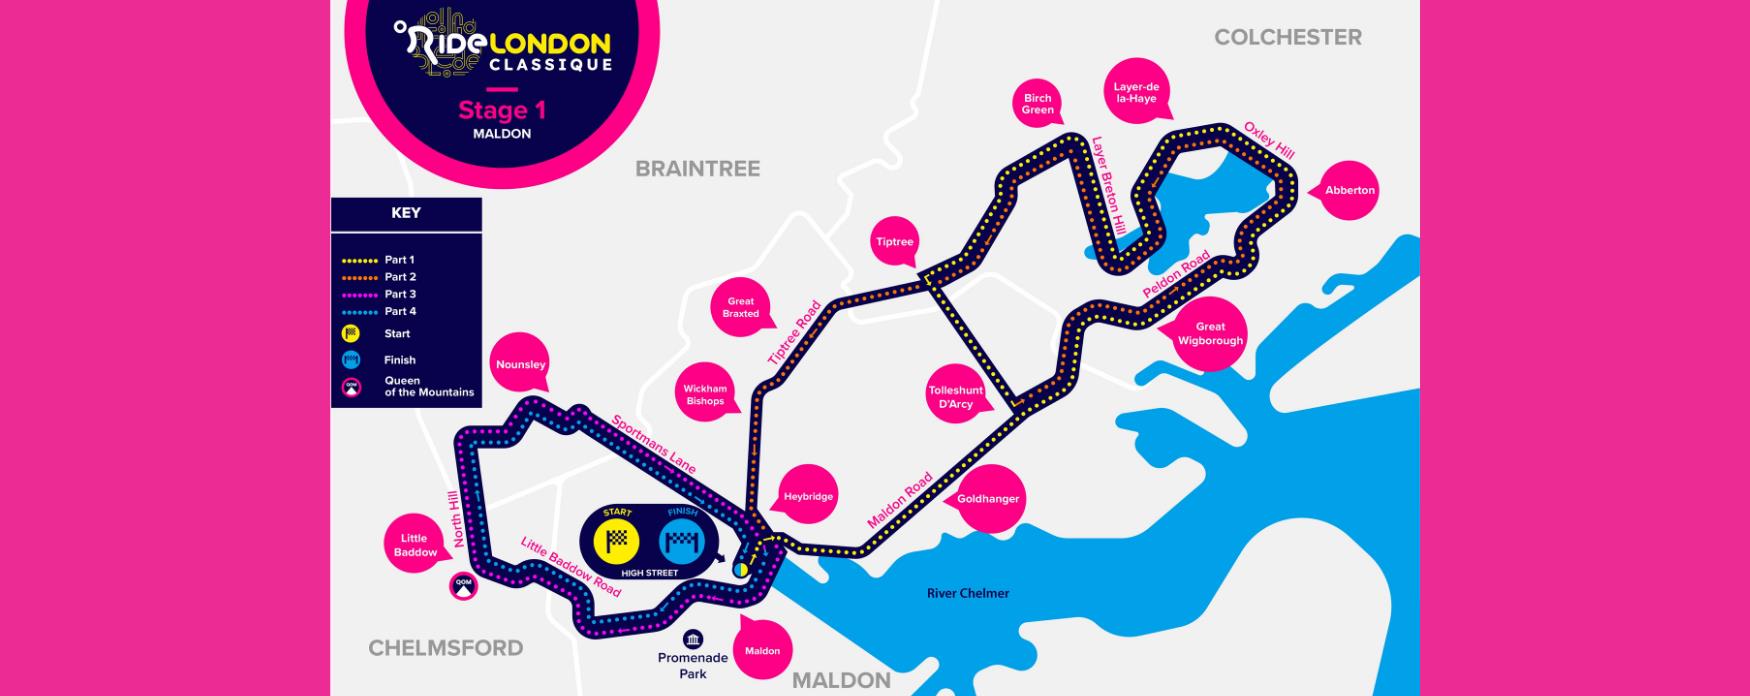 Route map for RideLondon